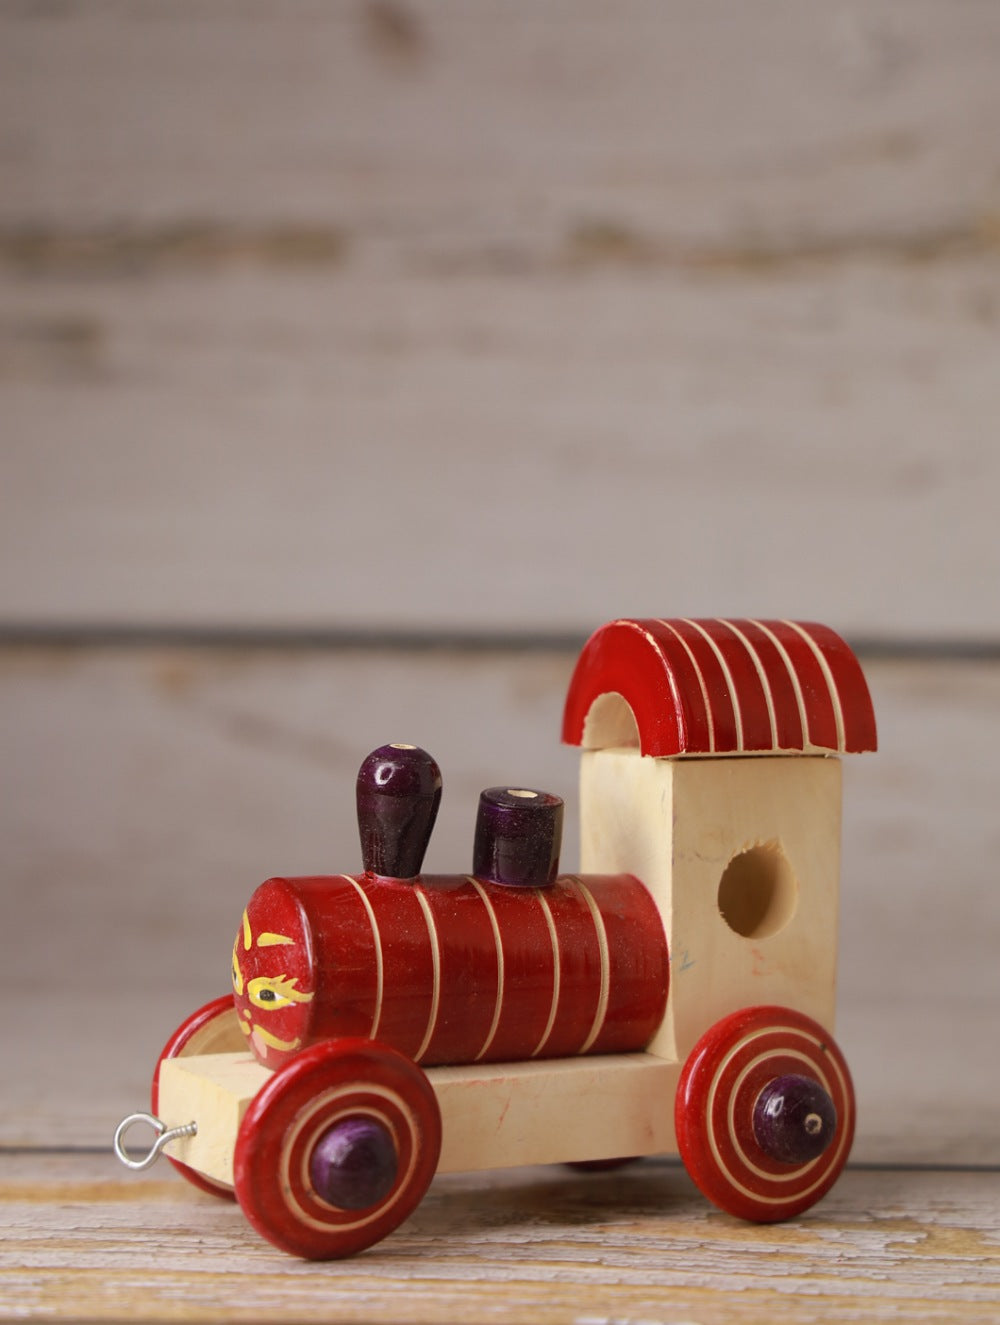 Load image into Gallery viewer, Channapatna Wooden Toy - Engine, Red